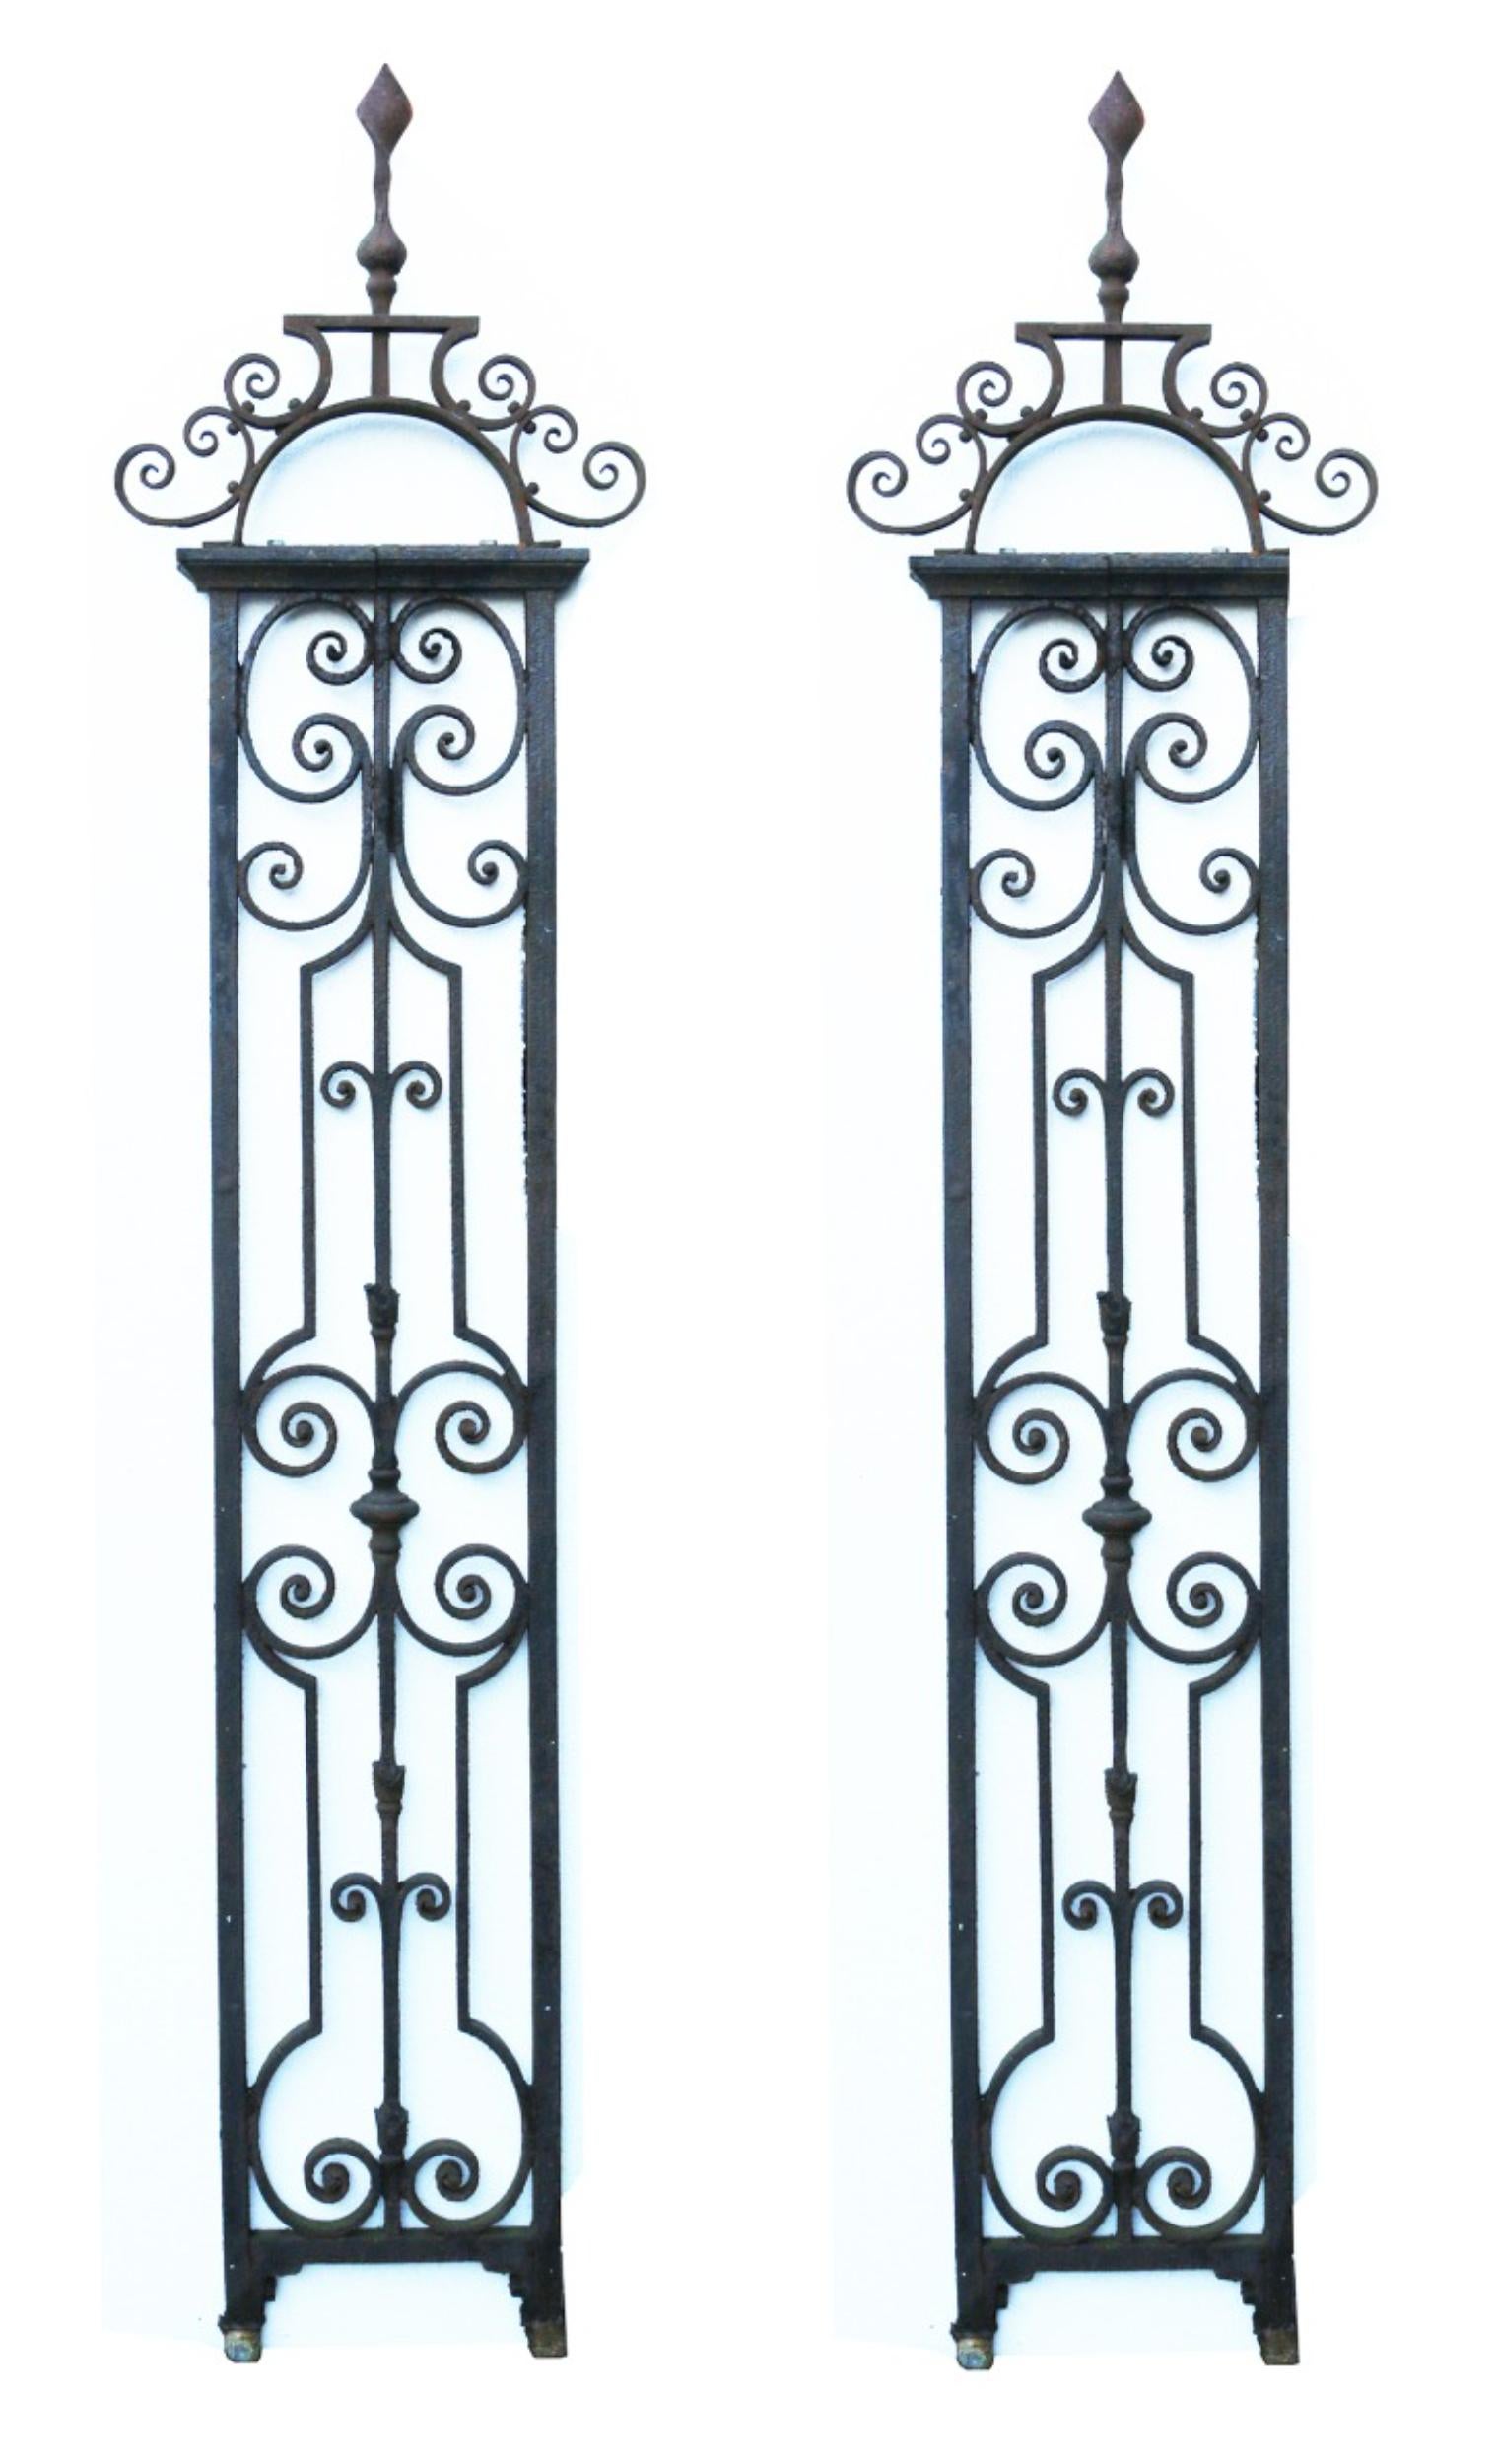 A pair of reclaimed Blacksmith made wrought iron posts, originally used to hang a pair of driveway gates. These currently have no hinge components attached.

Additional dimensions:

Each:

Height 245cm

Width 36cm-53cm

Depth 25cm.